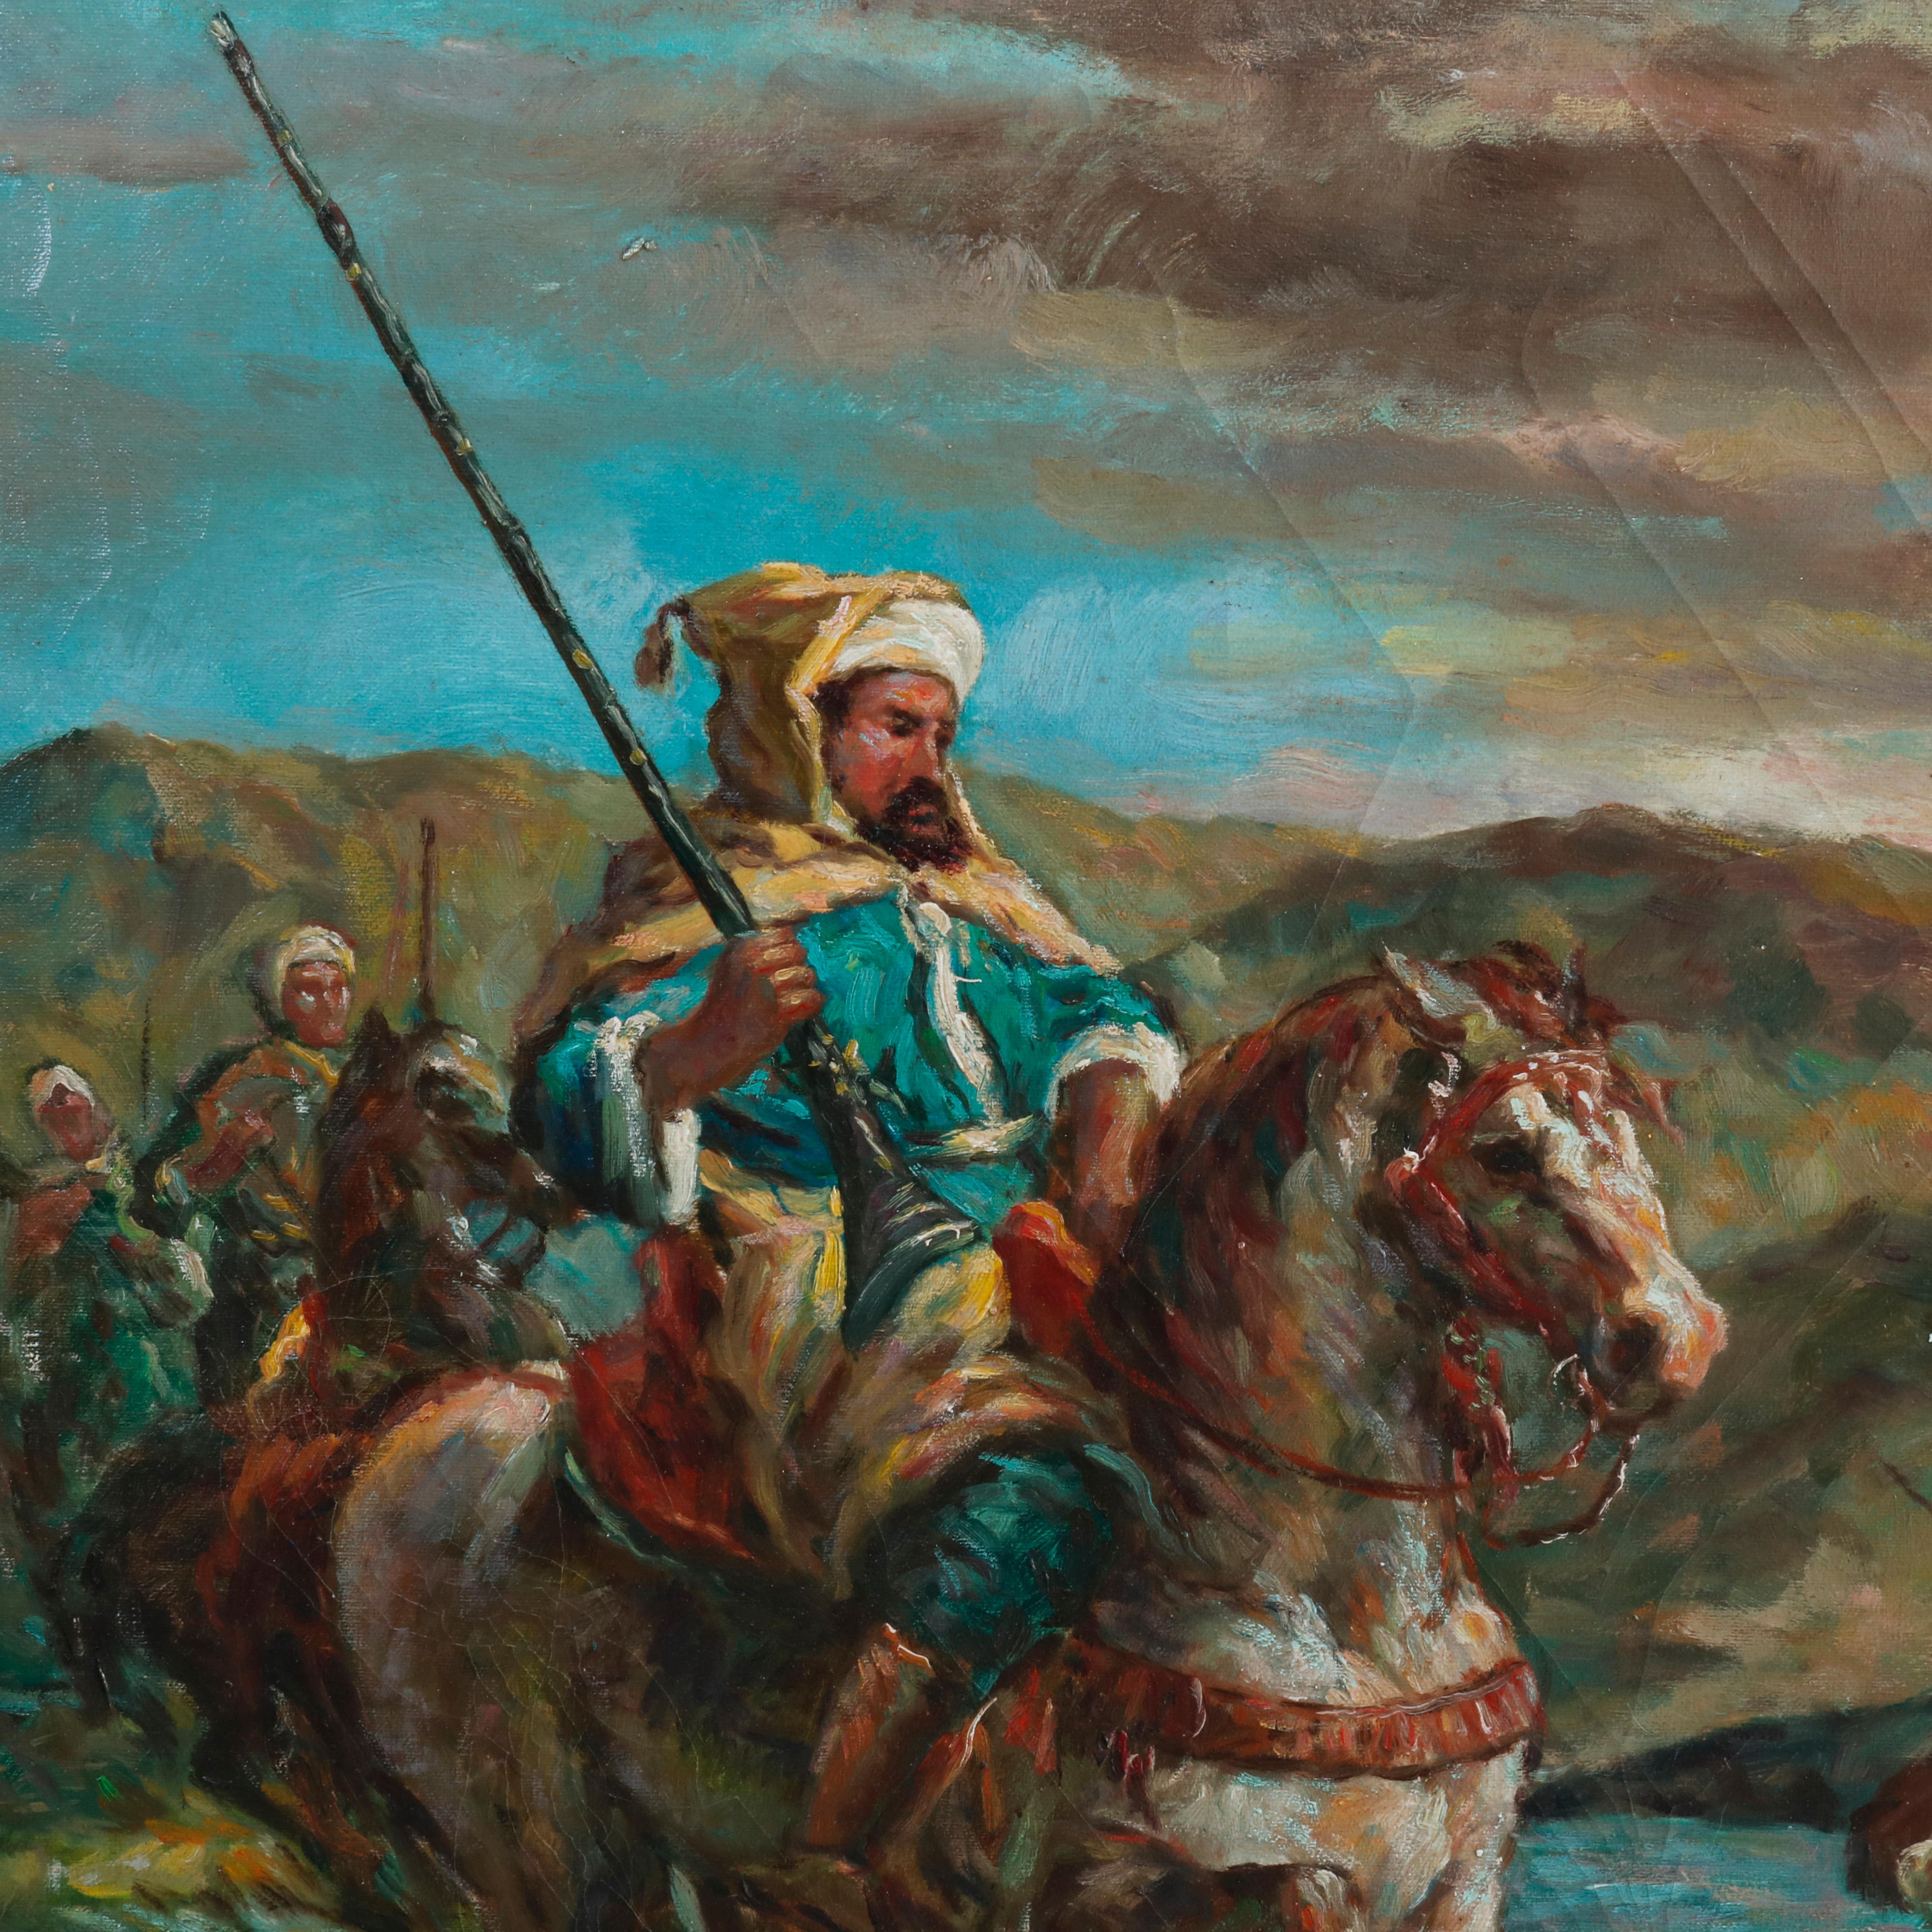 An antique and oversized Orientalist oil on canvas painting depicts Russian soldiers on horseback crossing a river in countryside setting, signed lower right Dakar, seated in giltwood frame with rosette corners, 20th century

Measures: 39.5